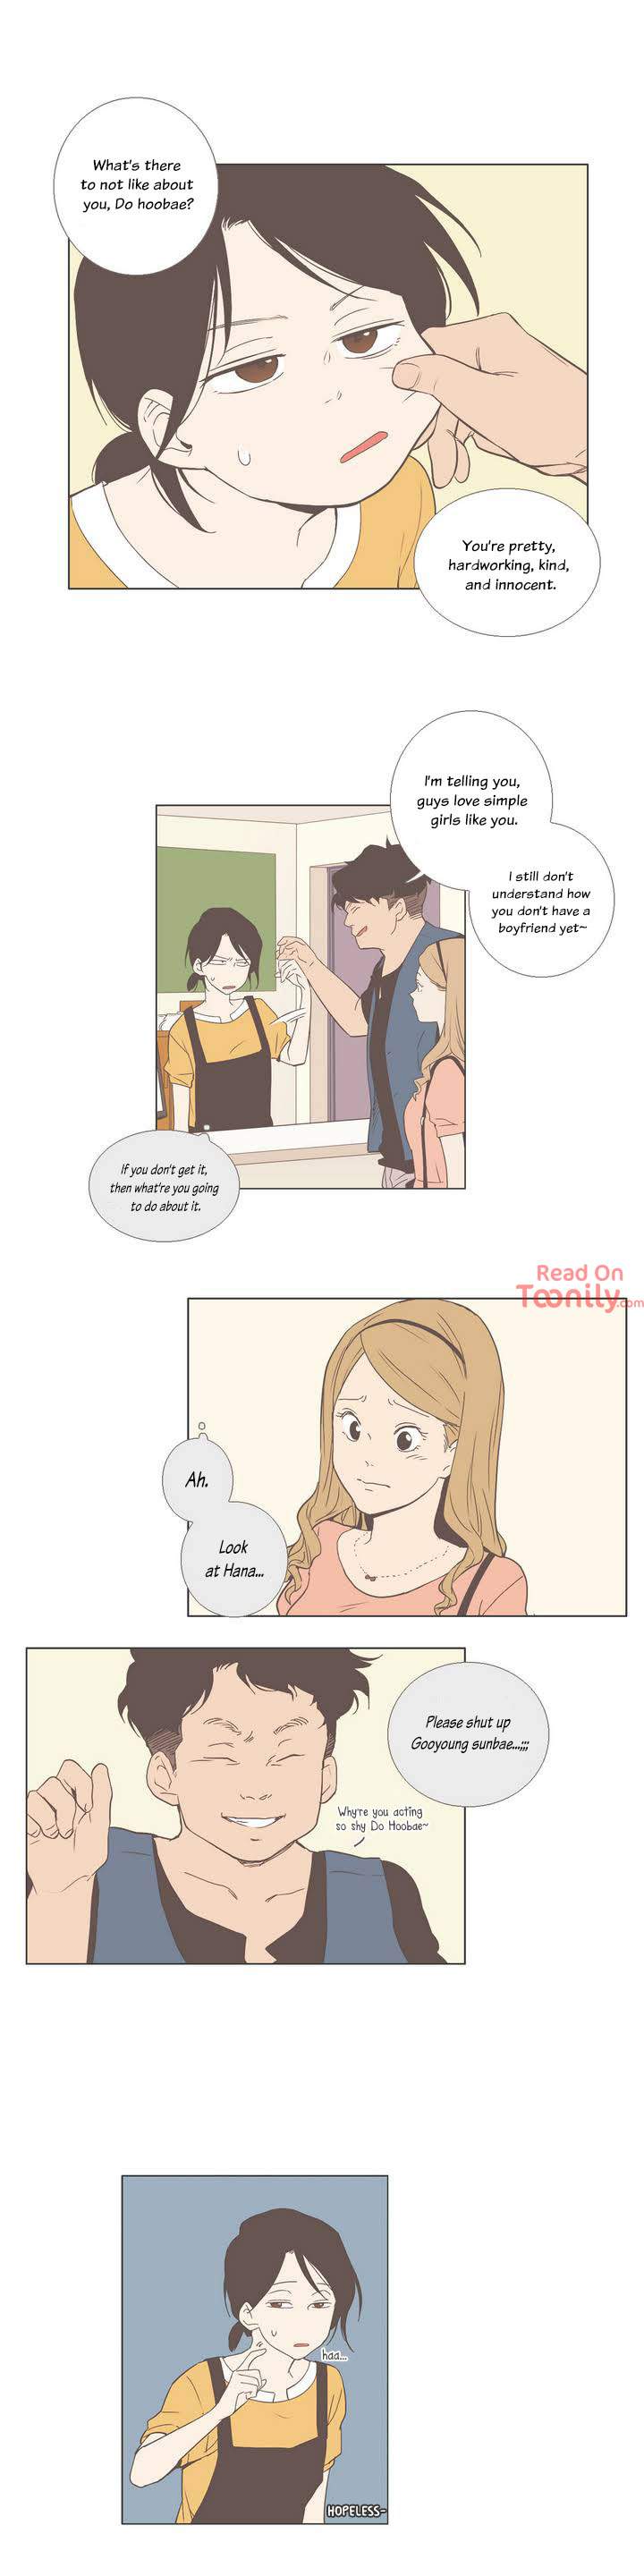 Something About Us - Chapter 21 Page 1